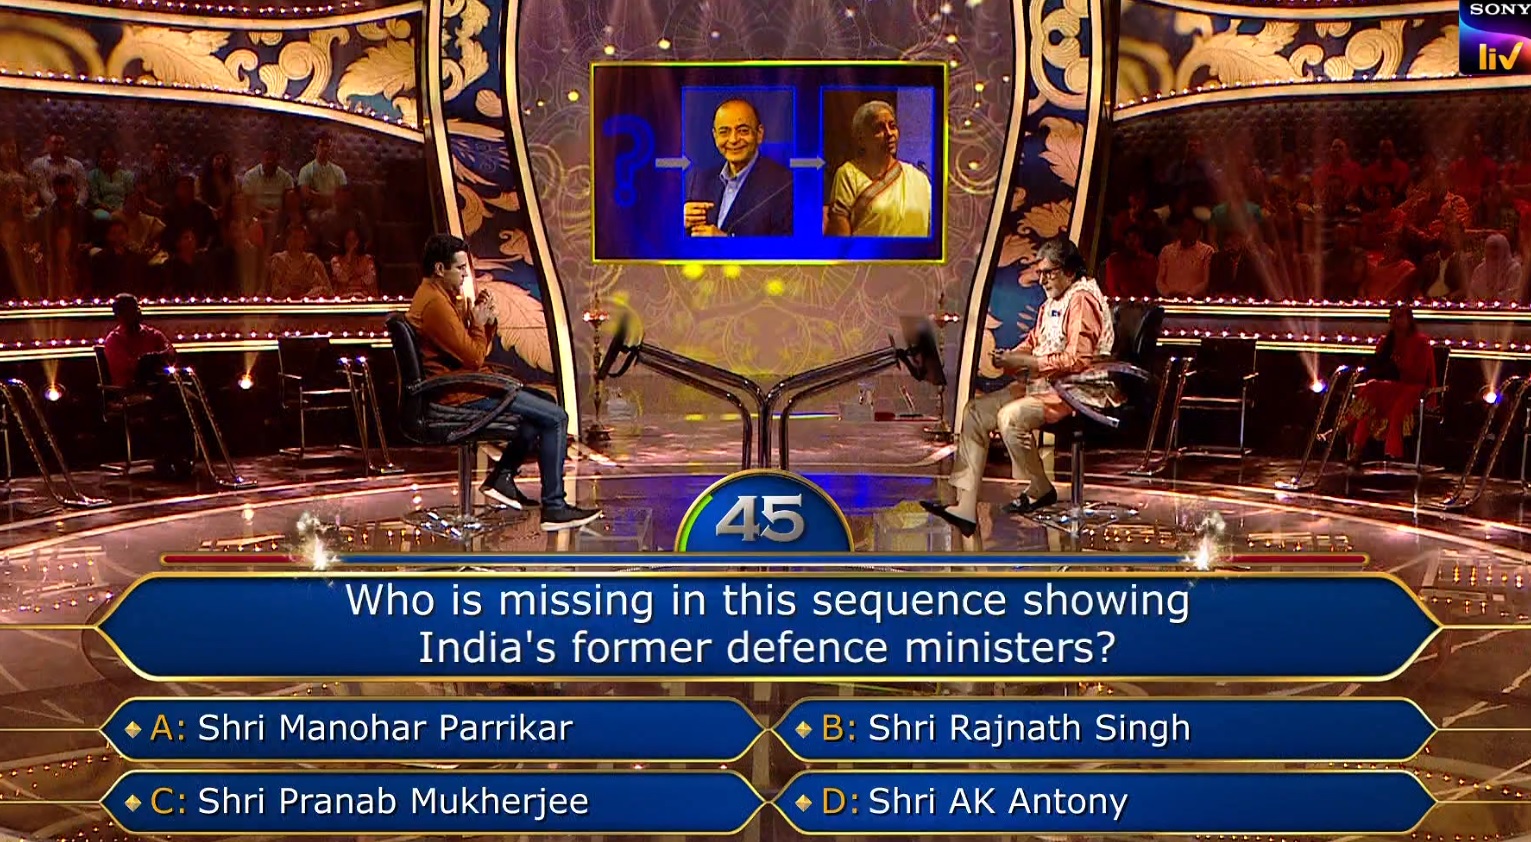 Ques : Who is missing in this sequence showing India’s former defence ministers?